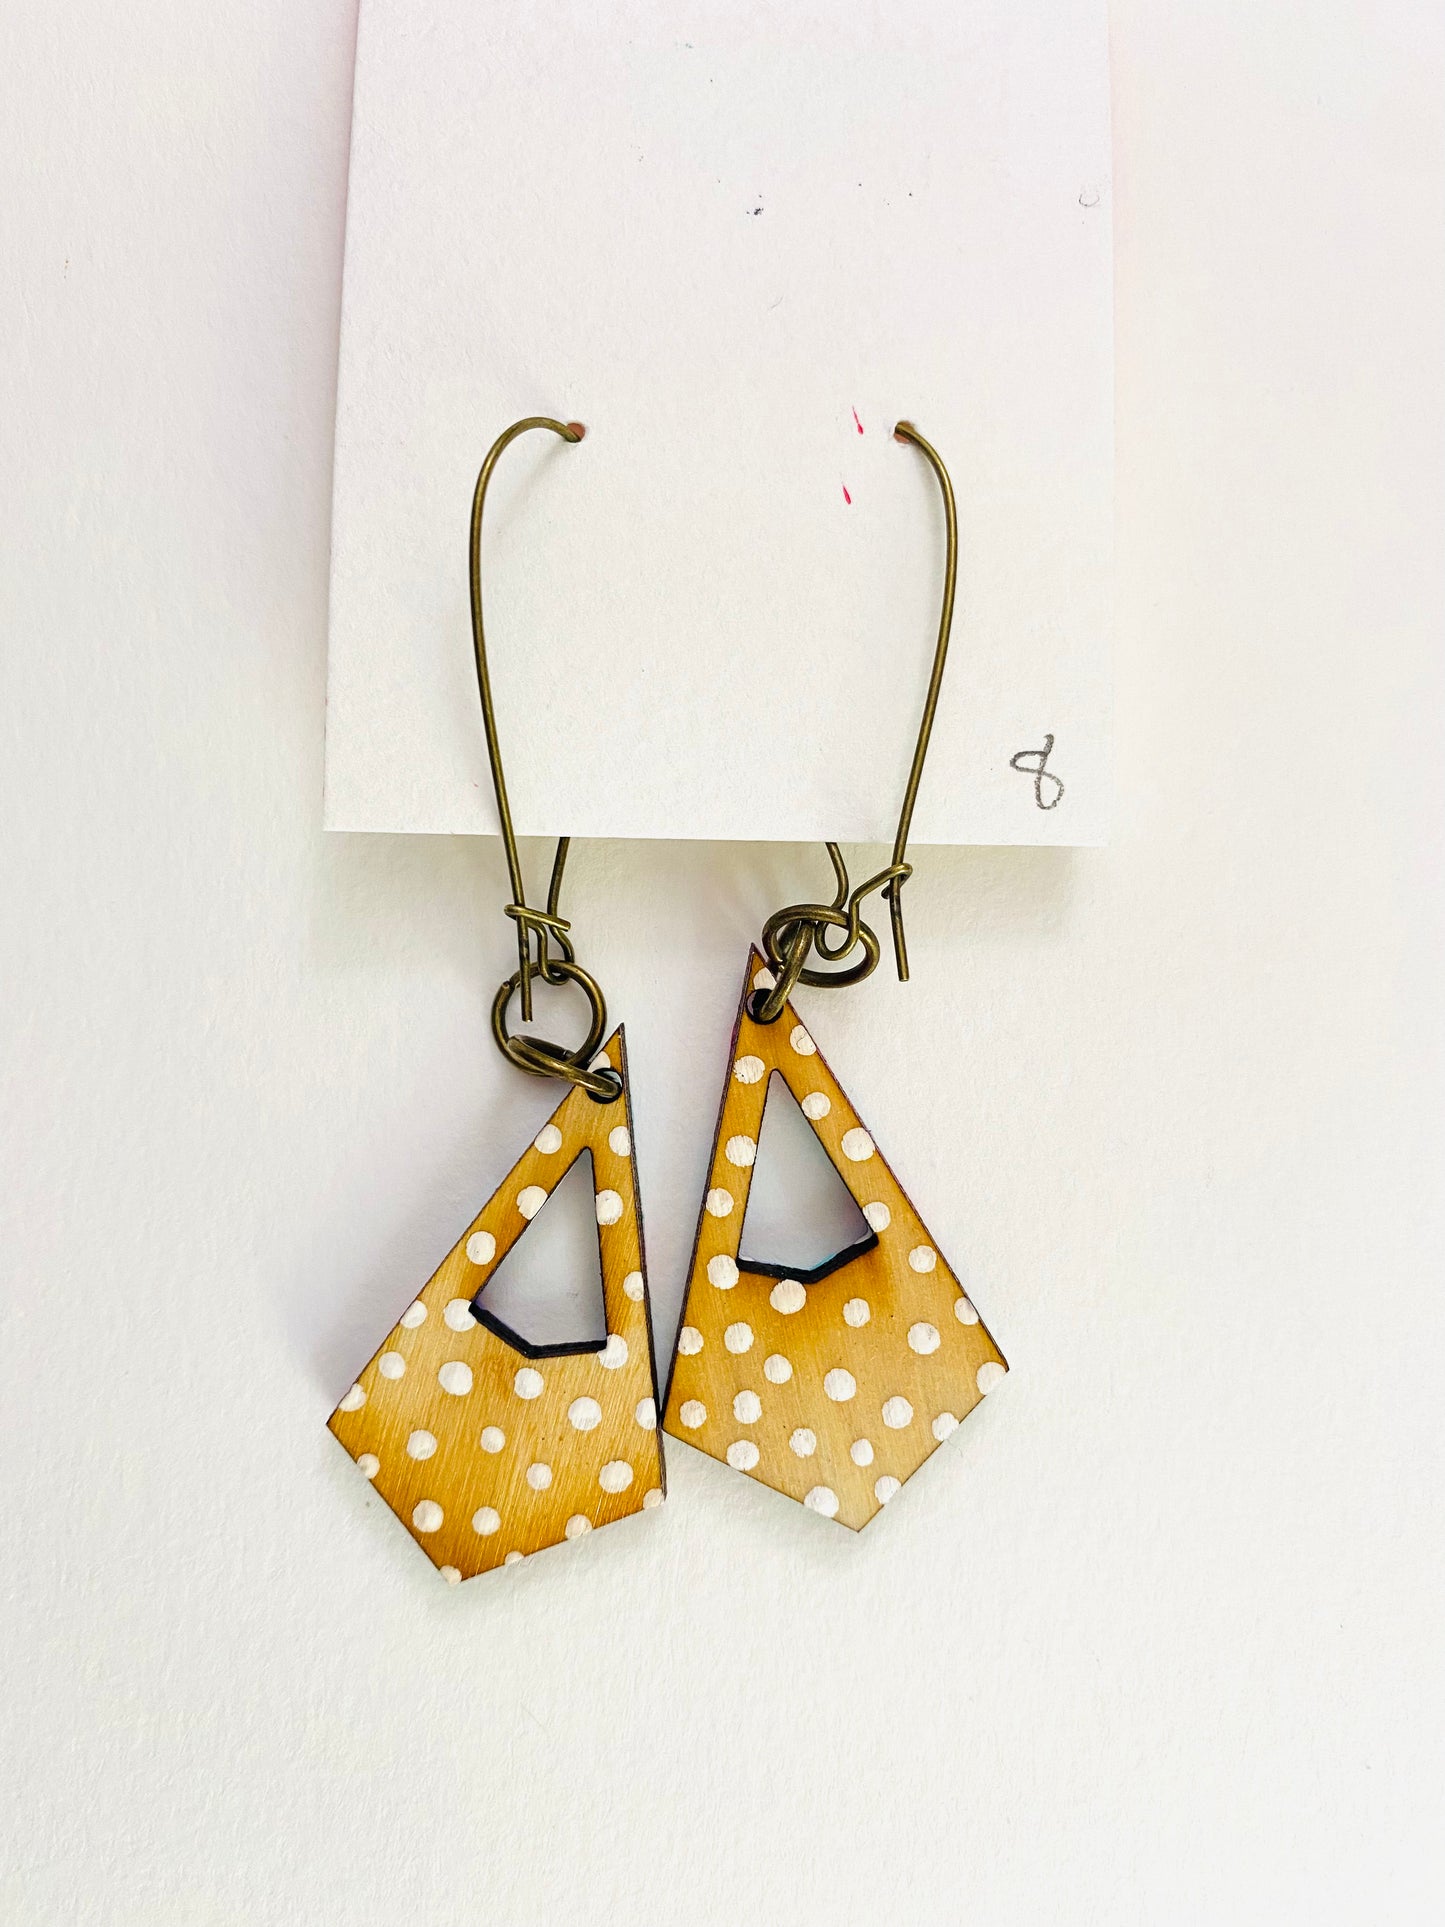 Colorful, Hand Painted, Geometric Shaped Earrings 8